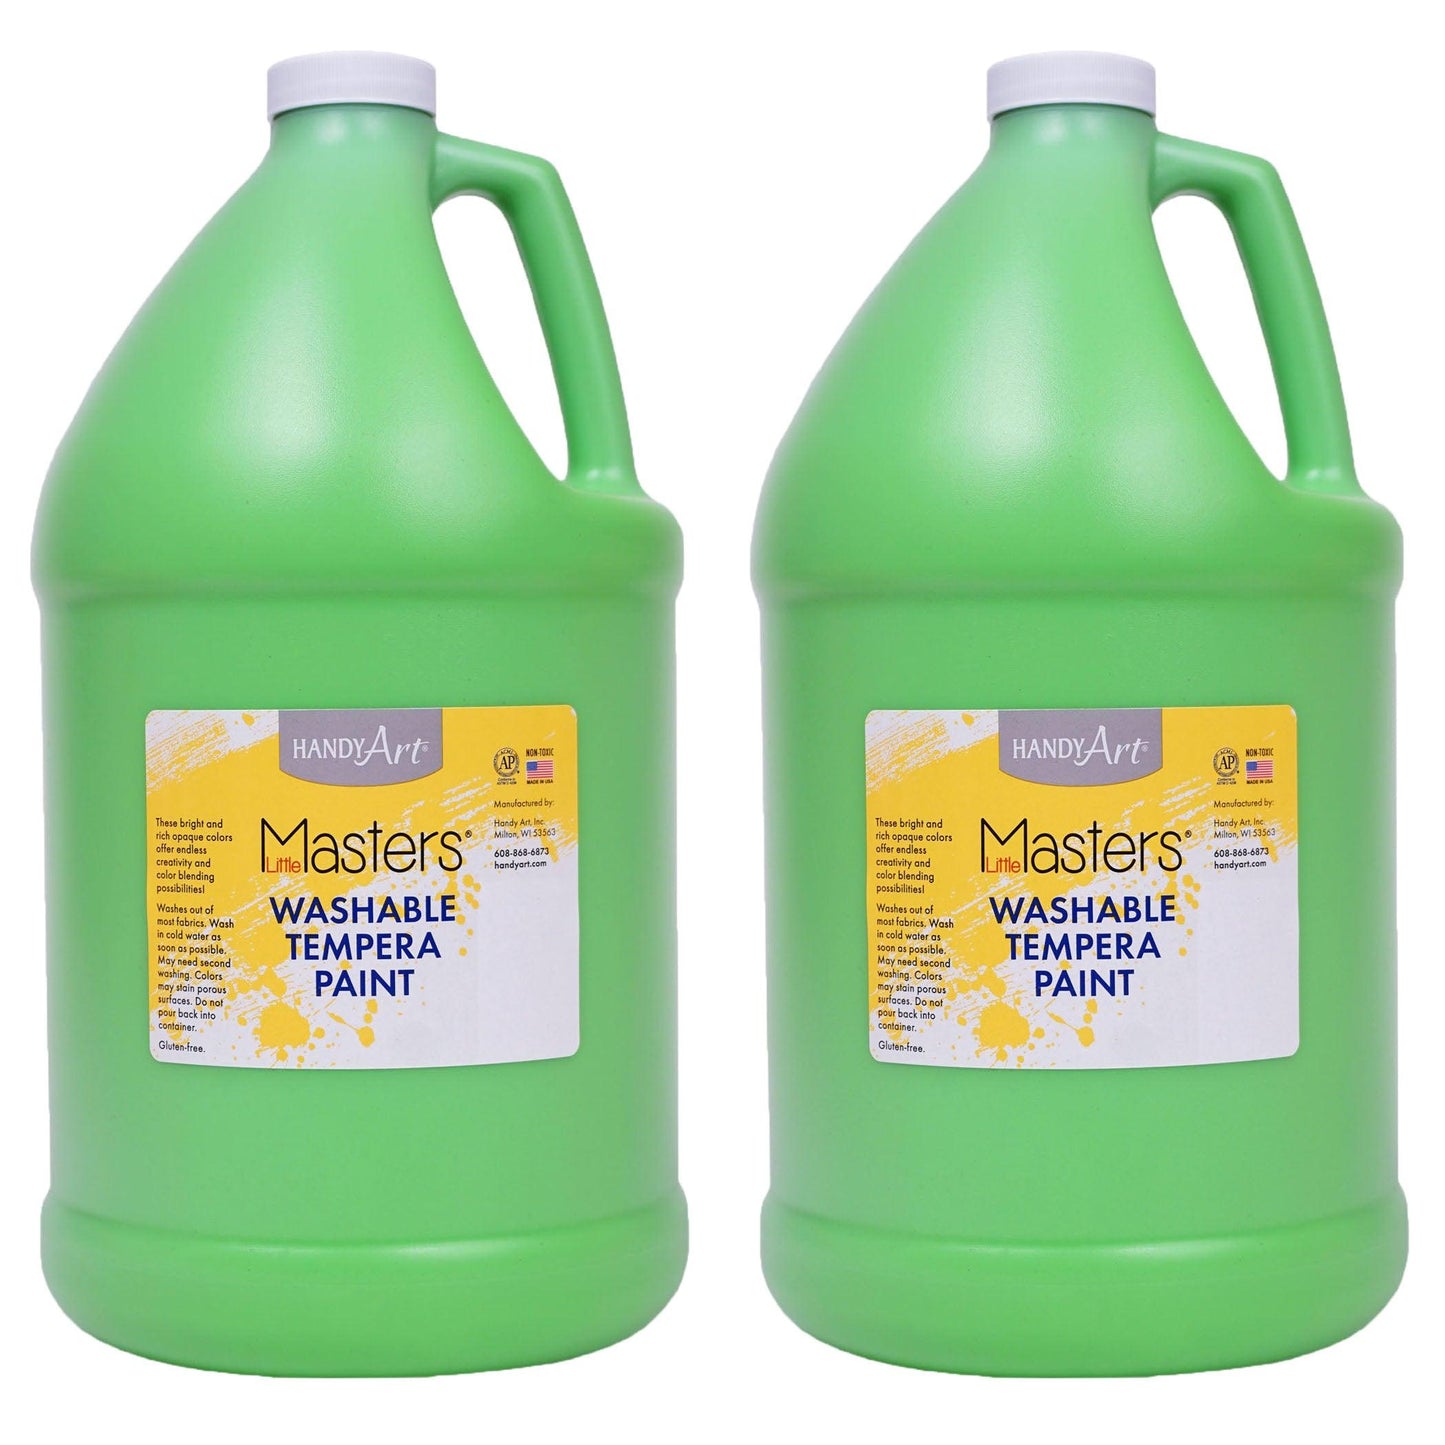 Little Masters® Washable Tempera Paint, Light Green, Gallon, Pack of 2 - Loomini